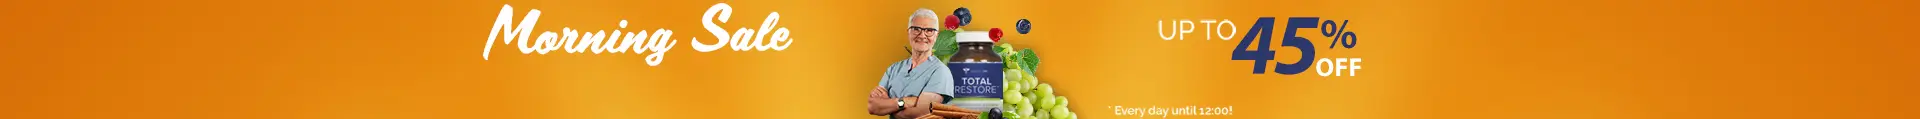 Total Restore Morning Sale - Up to 45% off